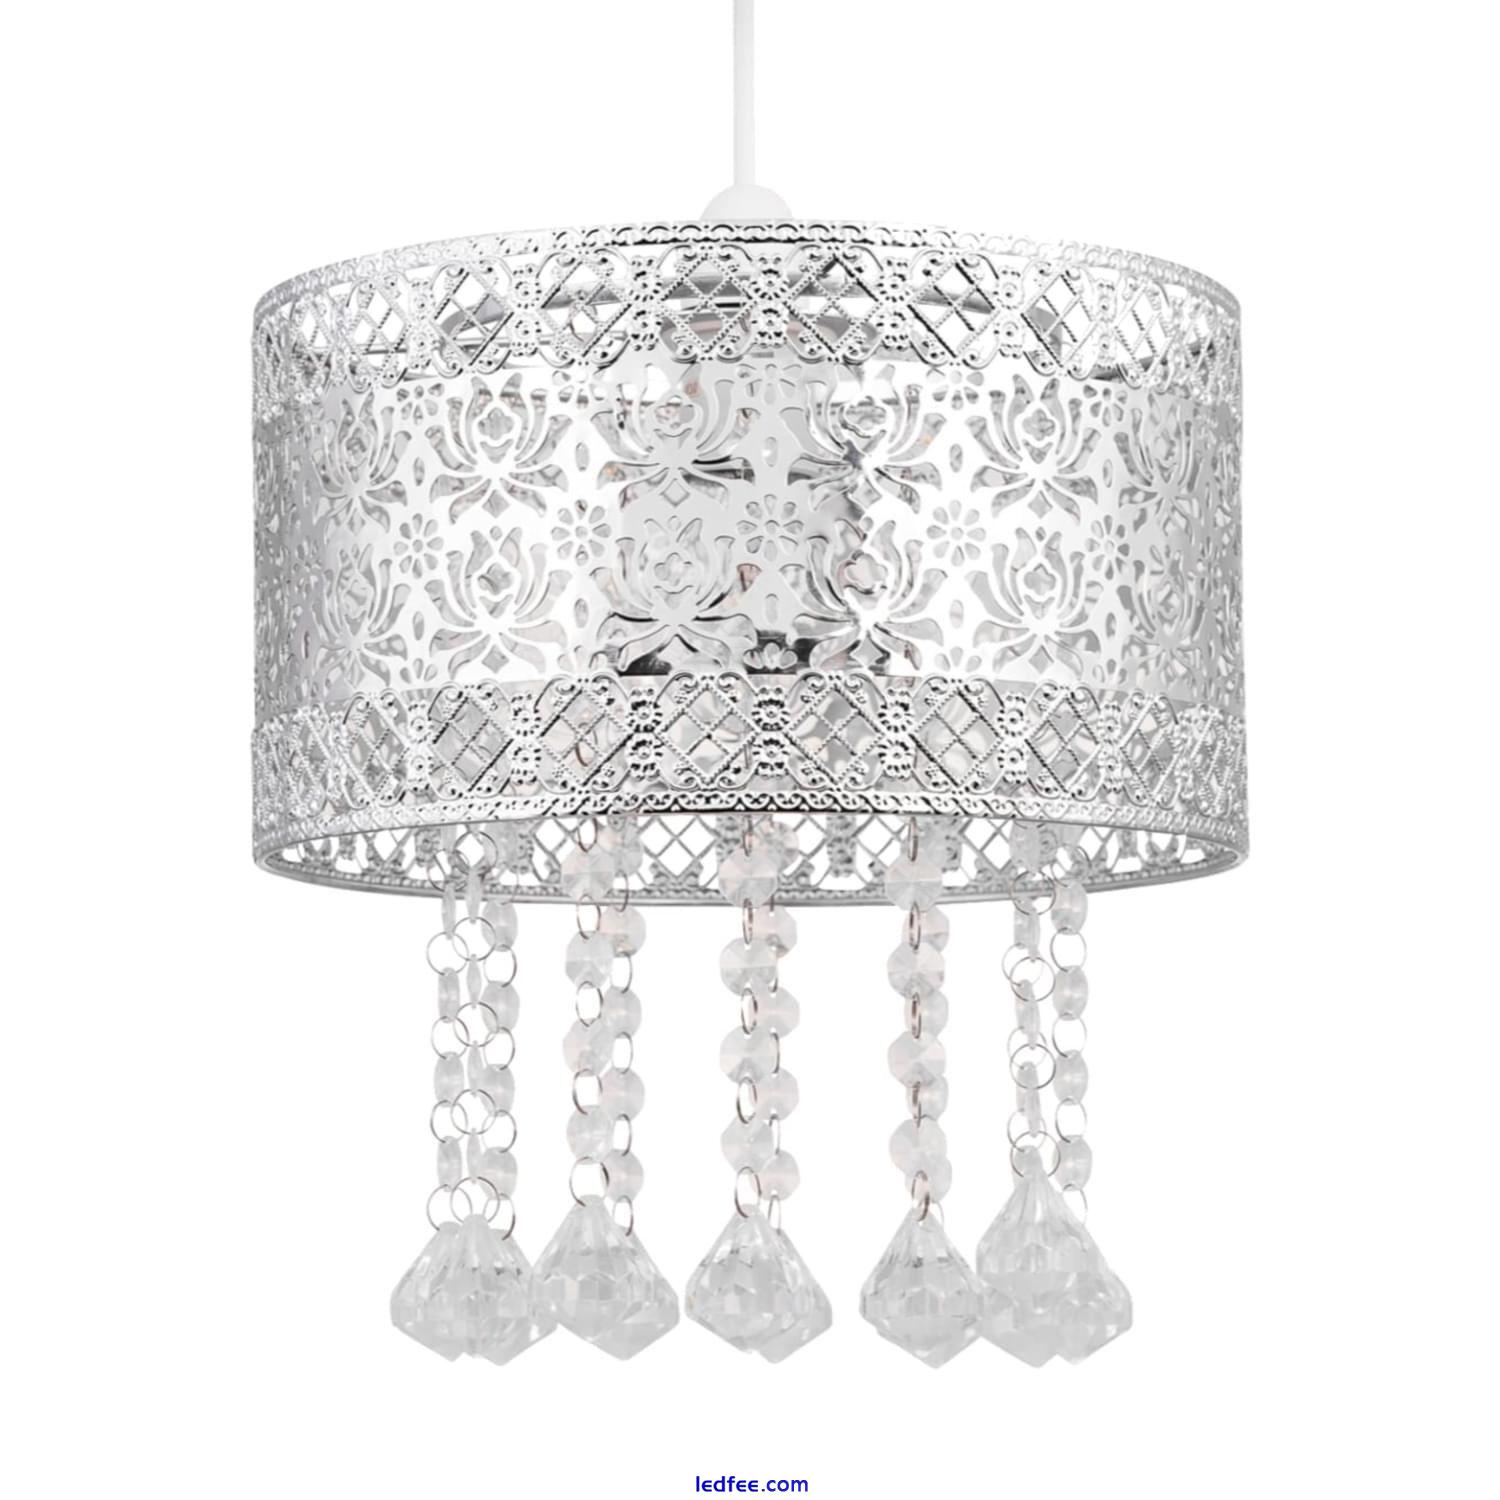 Modern Pair of Chrome Metal Jewelled Easy Fit Ceiling Light Shade Chandeliers 0 